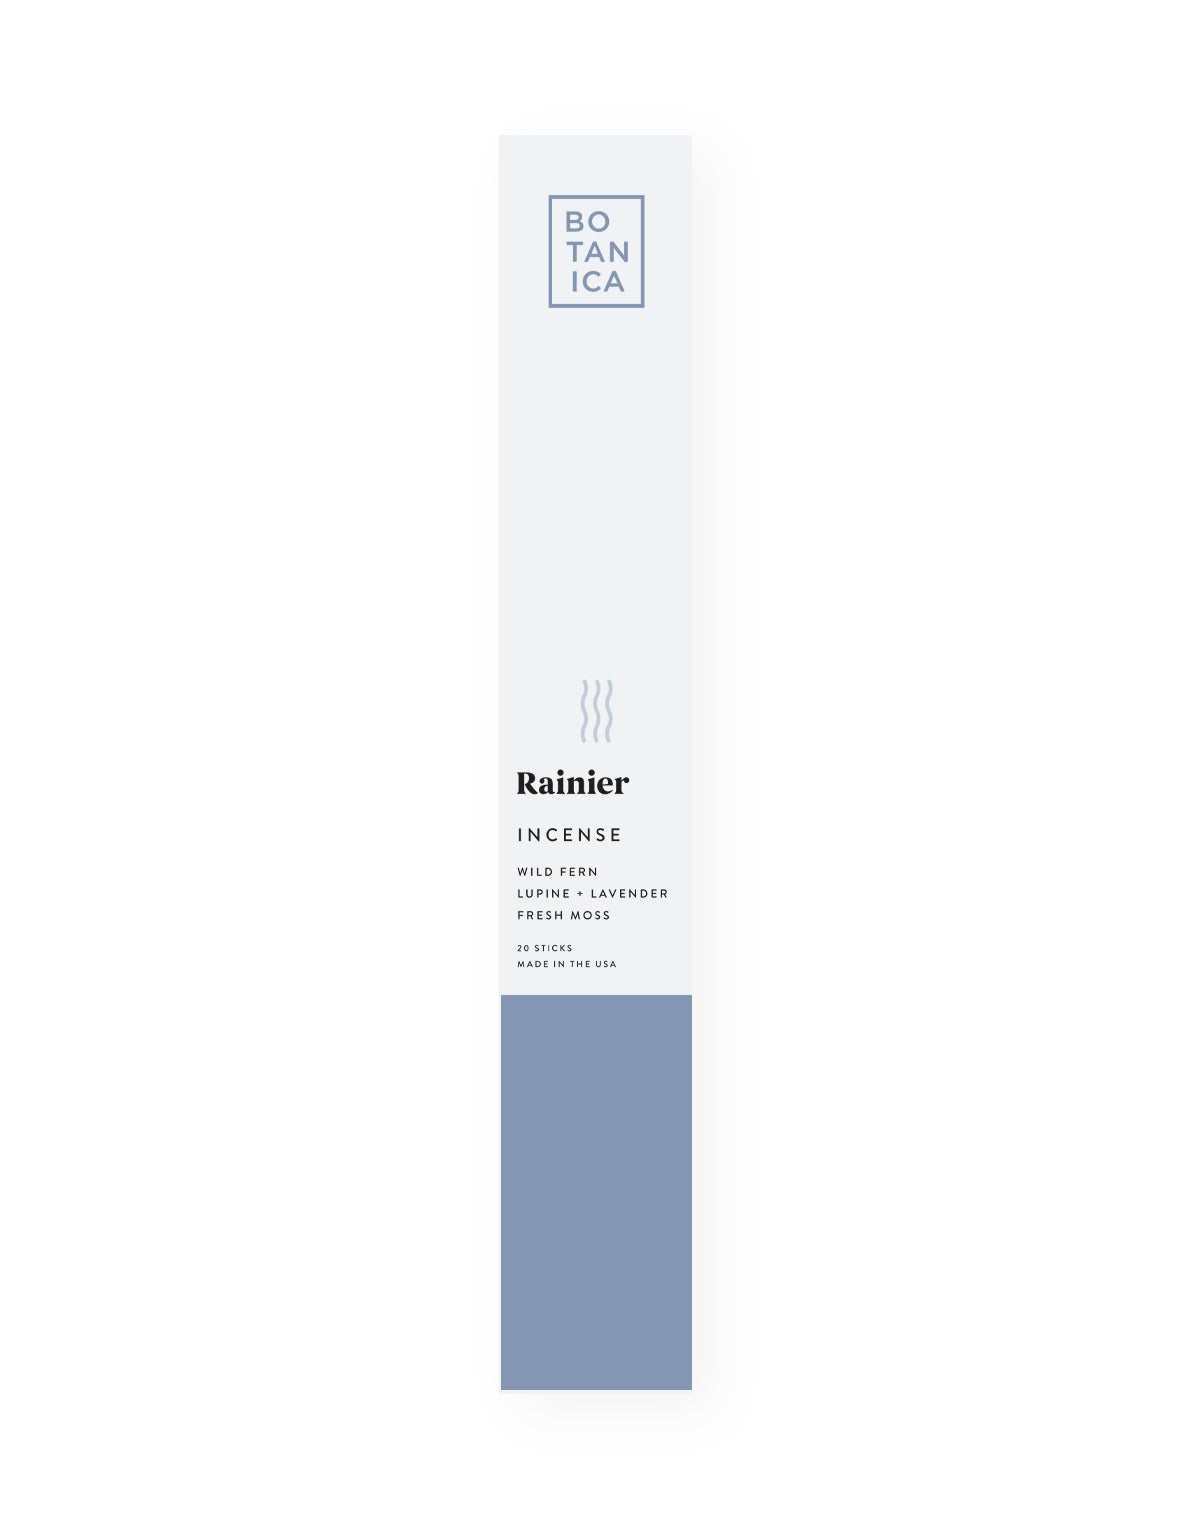 botanica rainier incense. Made with high-quality fragrance blends, plus essential oils for a long, balanced ritualistic experience–sure to make any dwelling feel like a luxurious retreat. Scent notes of wild fern, lupine, lavender, and fresh moss.